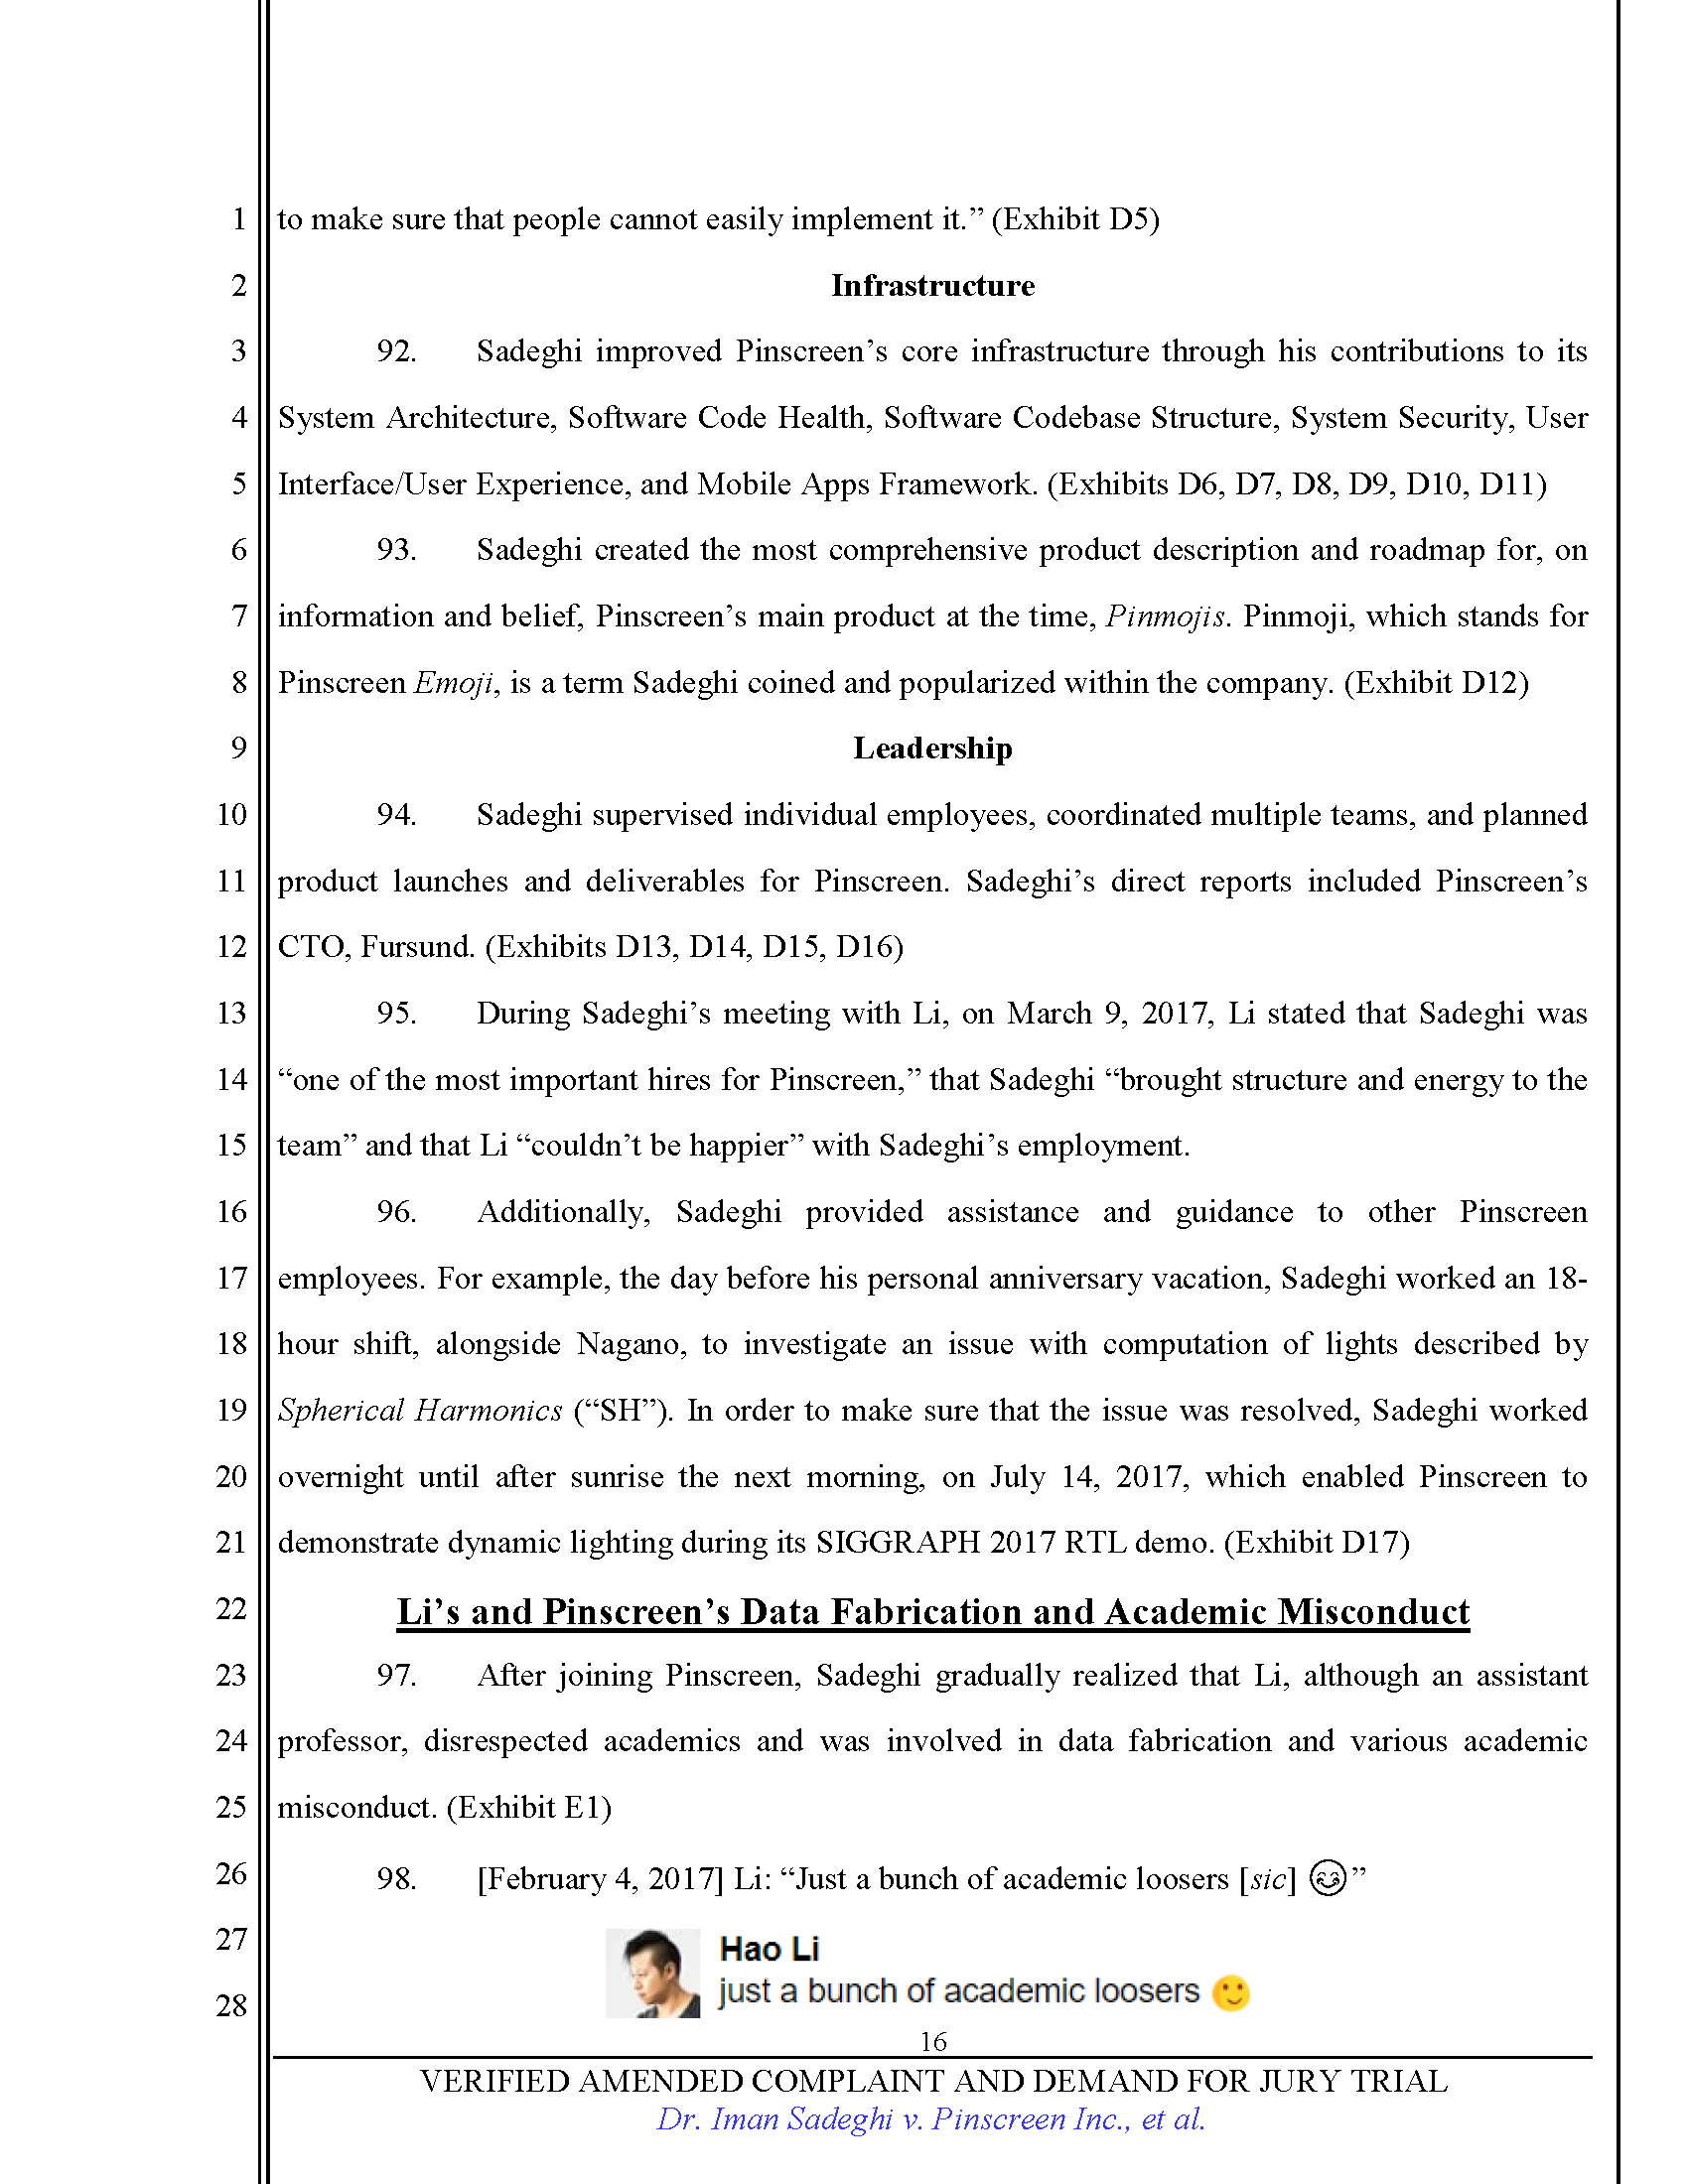 First Amended Complaint (FAC) Page 16